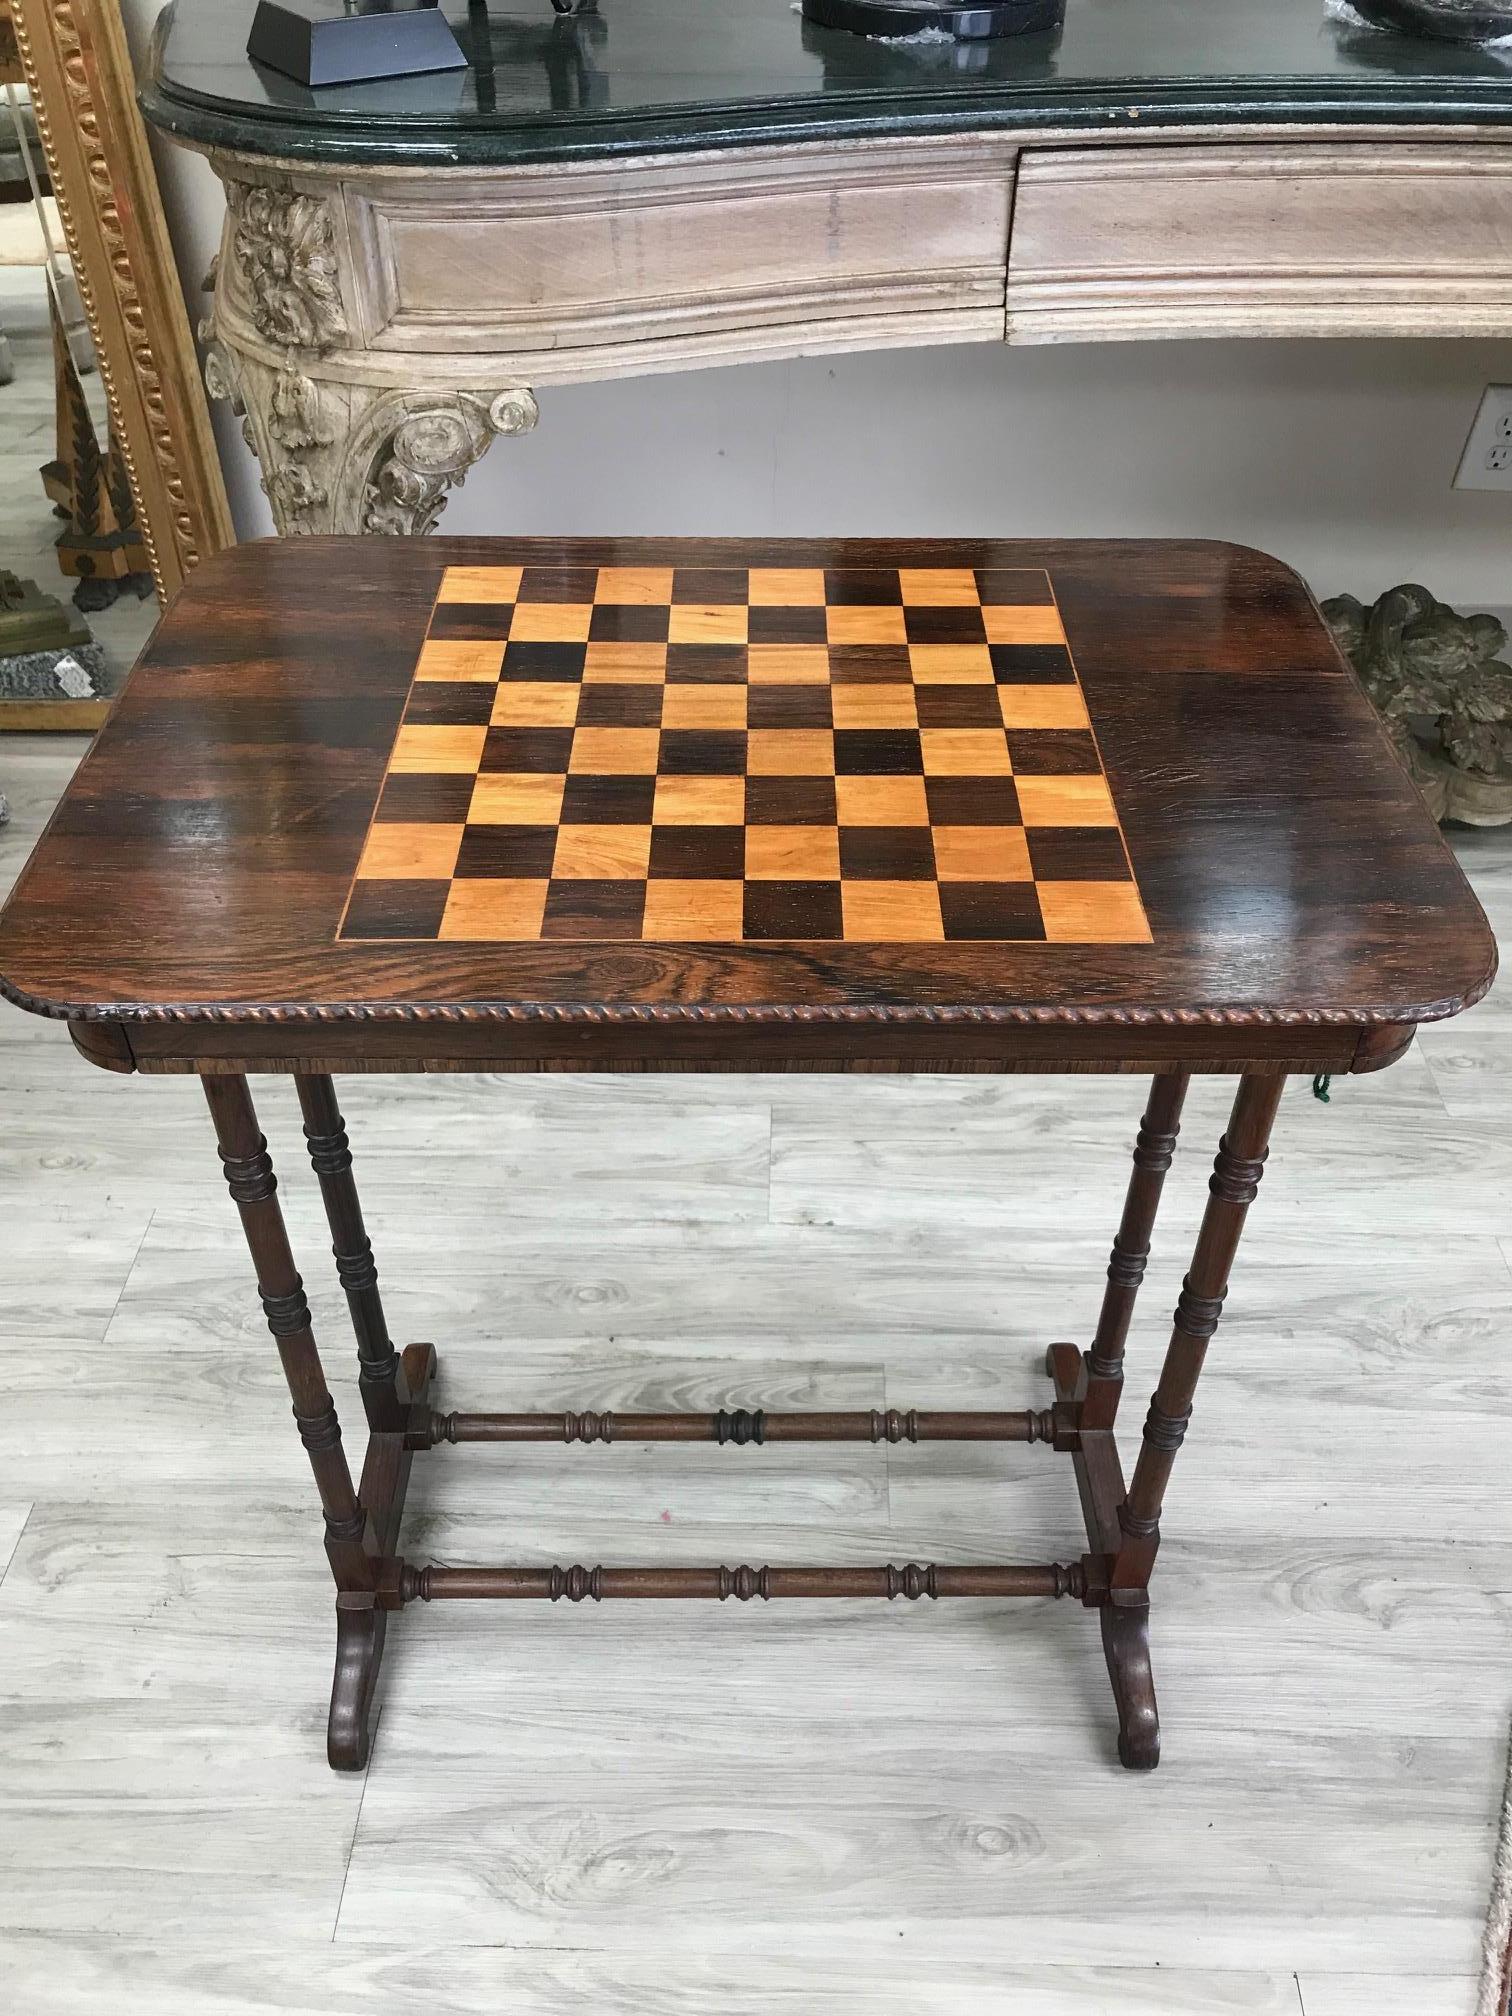 Unusual mid-1800s mixed wood game table with inlaid rosewood chess board on top and beautiful leather backgammon board in drawer.